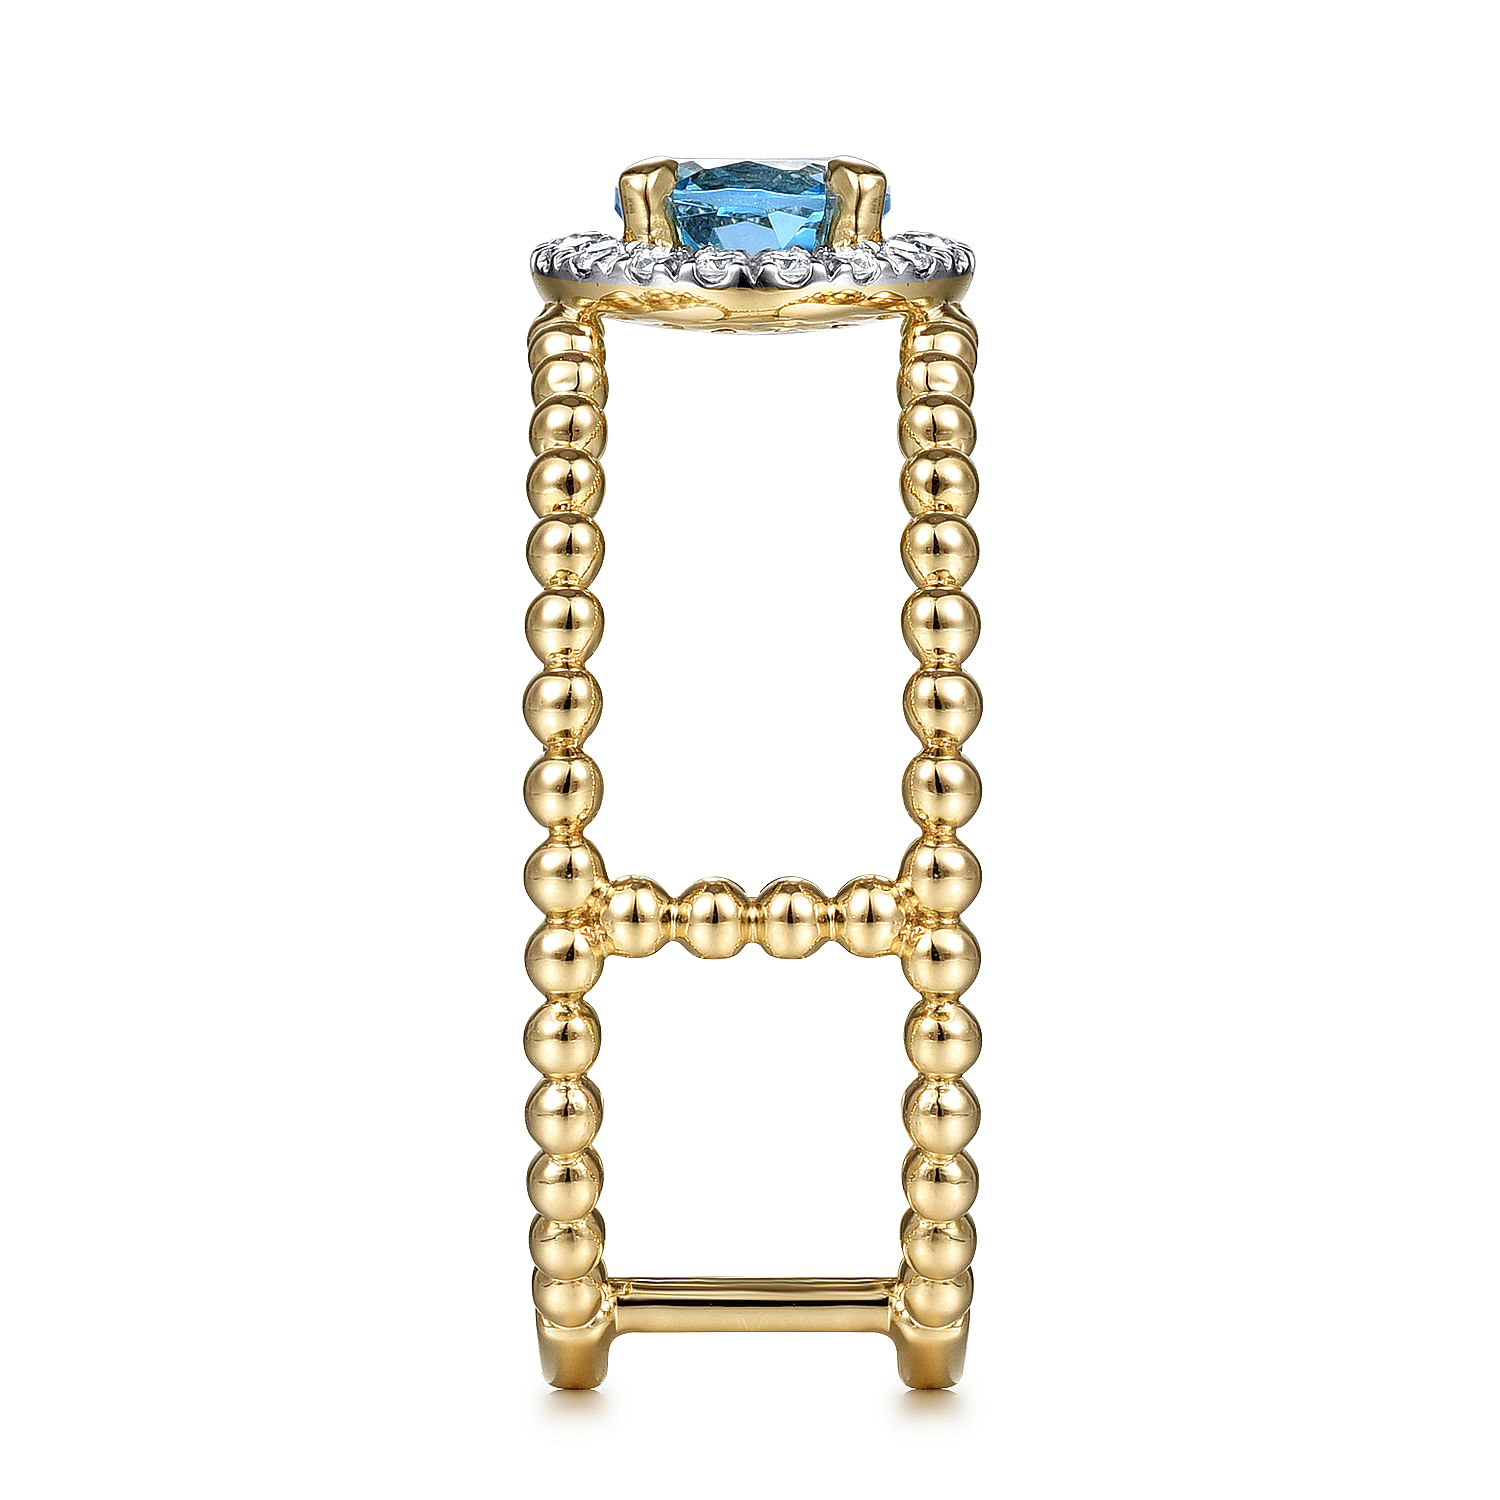 14K Yellow Gold Round Swiss Blue Topaz and Diamond Halo Two Row Ring